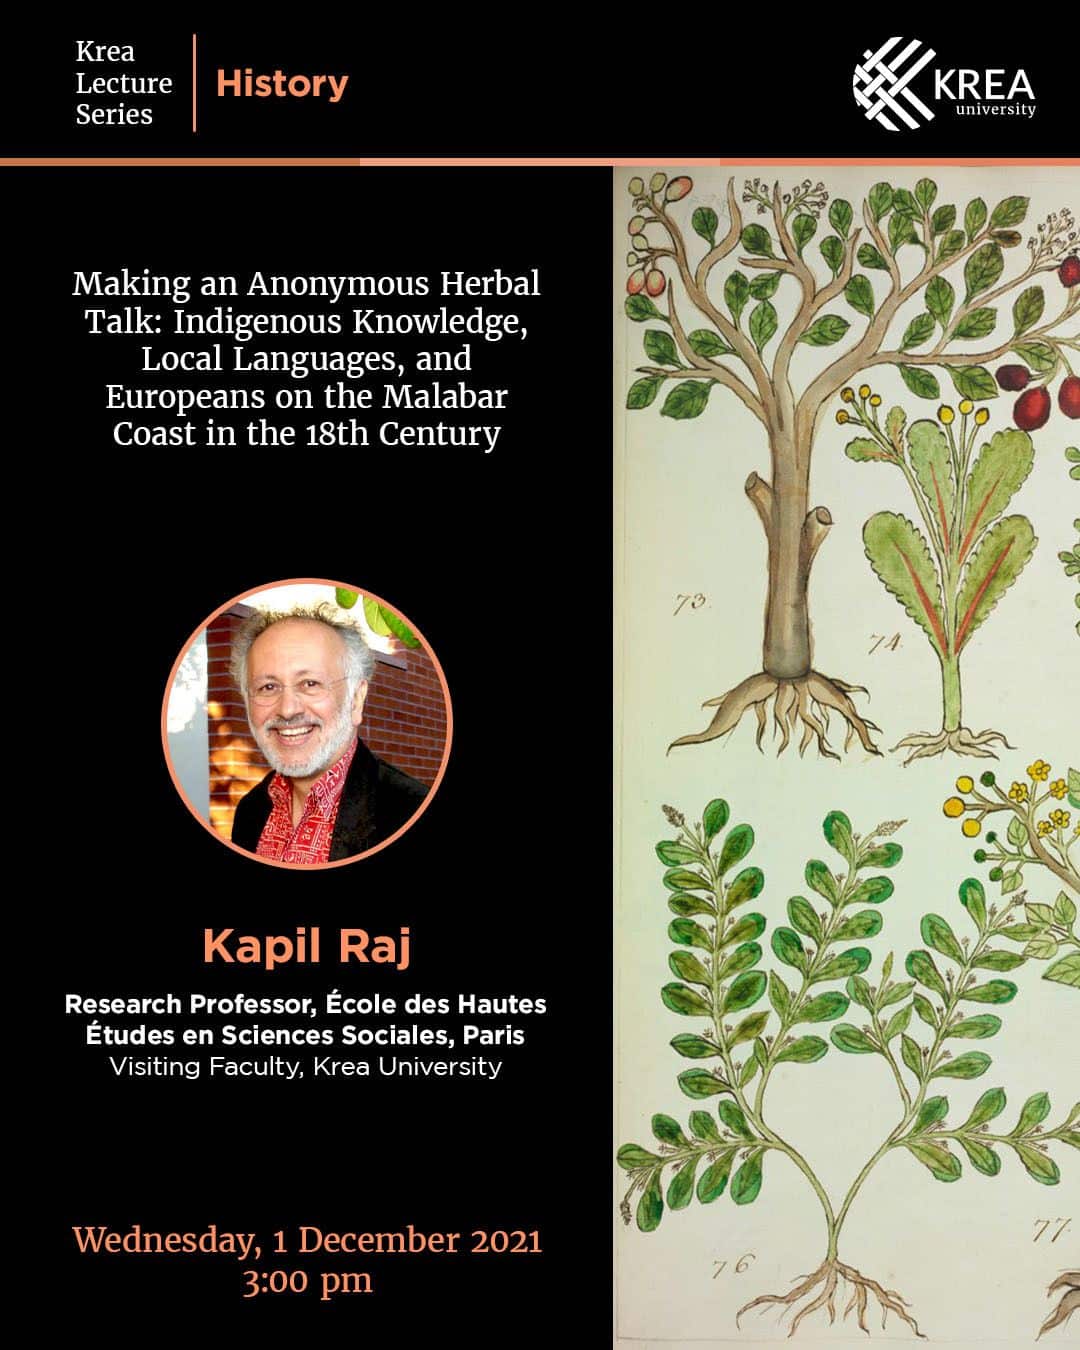 Making an Anonymous Herbal Talk: Indigenous Knowledge, Local Languages, and Europeans on the Malabar Coast in the 18th Century